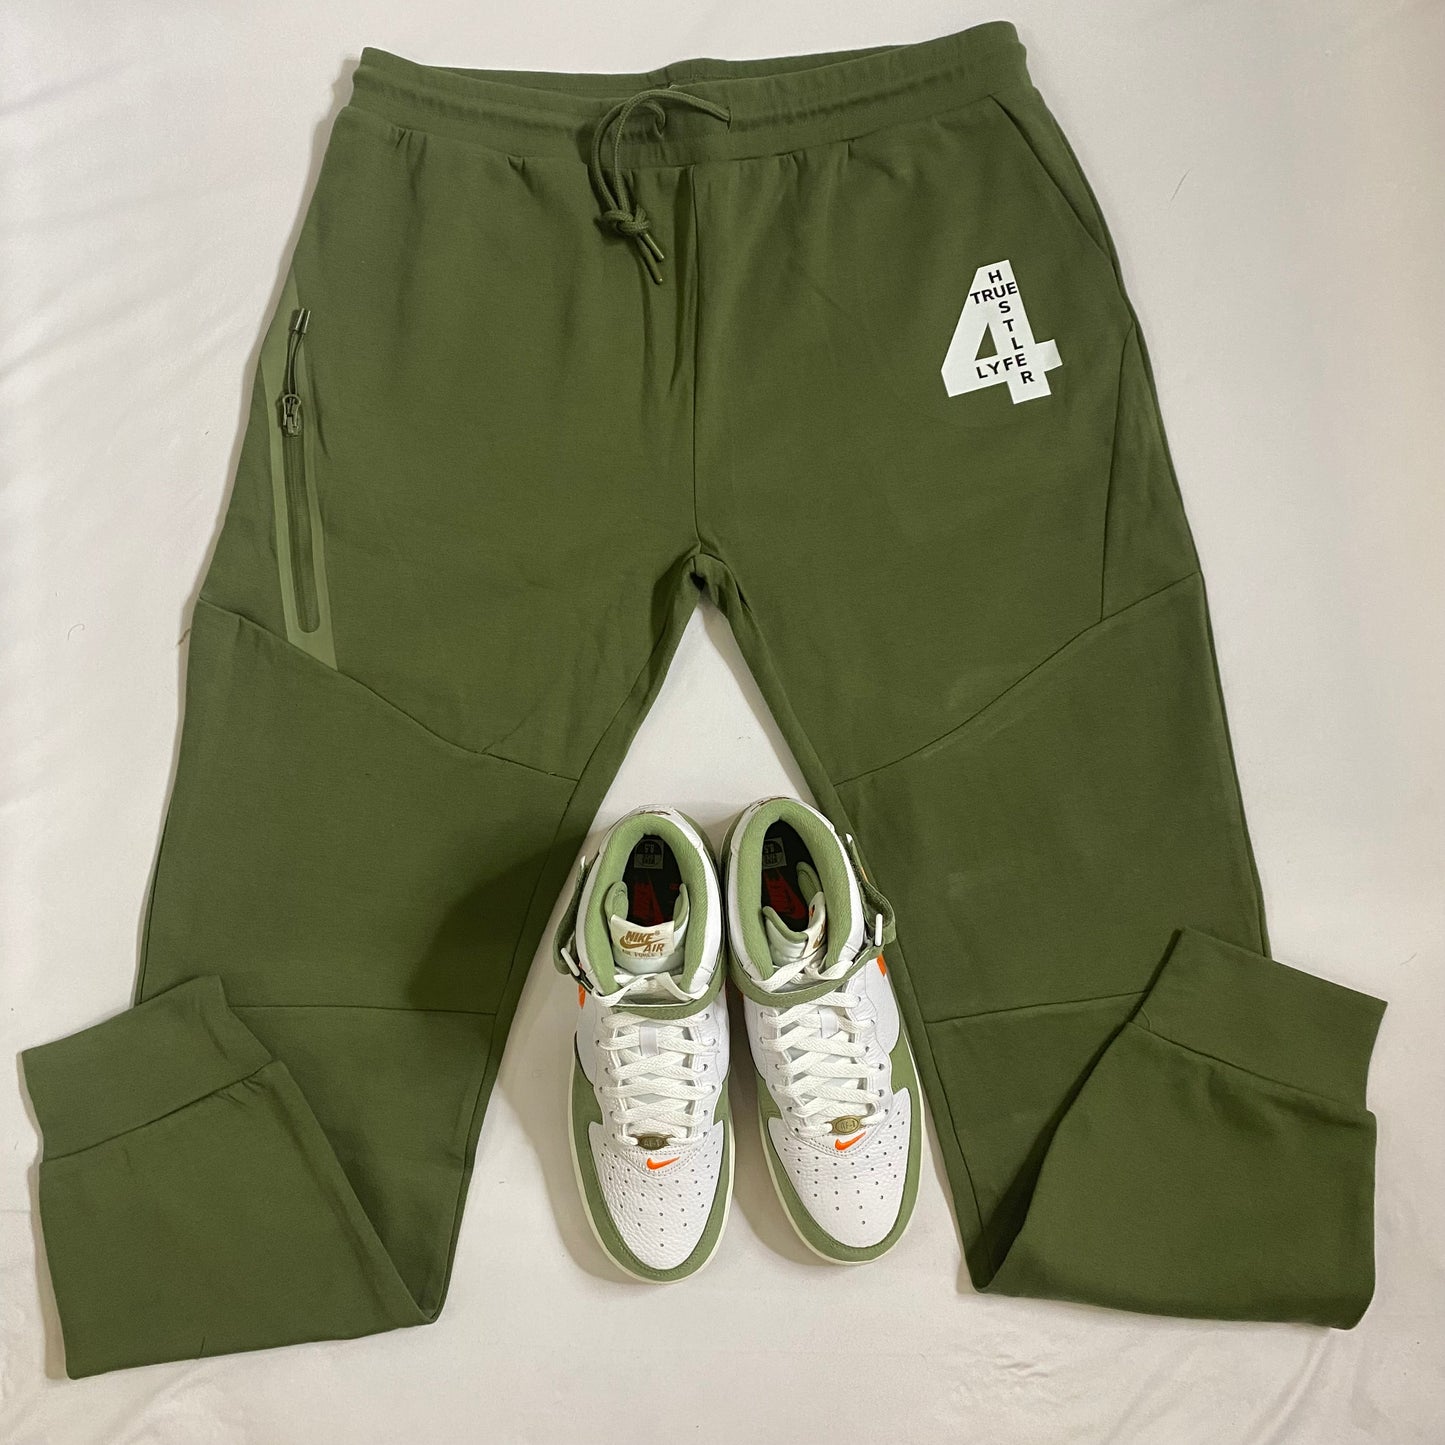 Olive Green Unisex Tech Tracksuit with" Whats 4 U Is 4 U Logo"